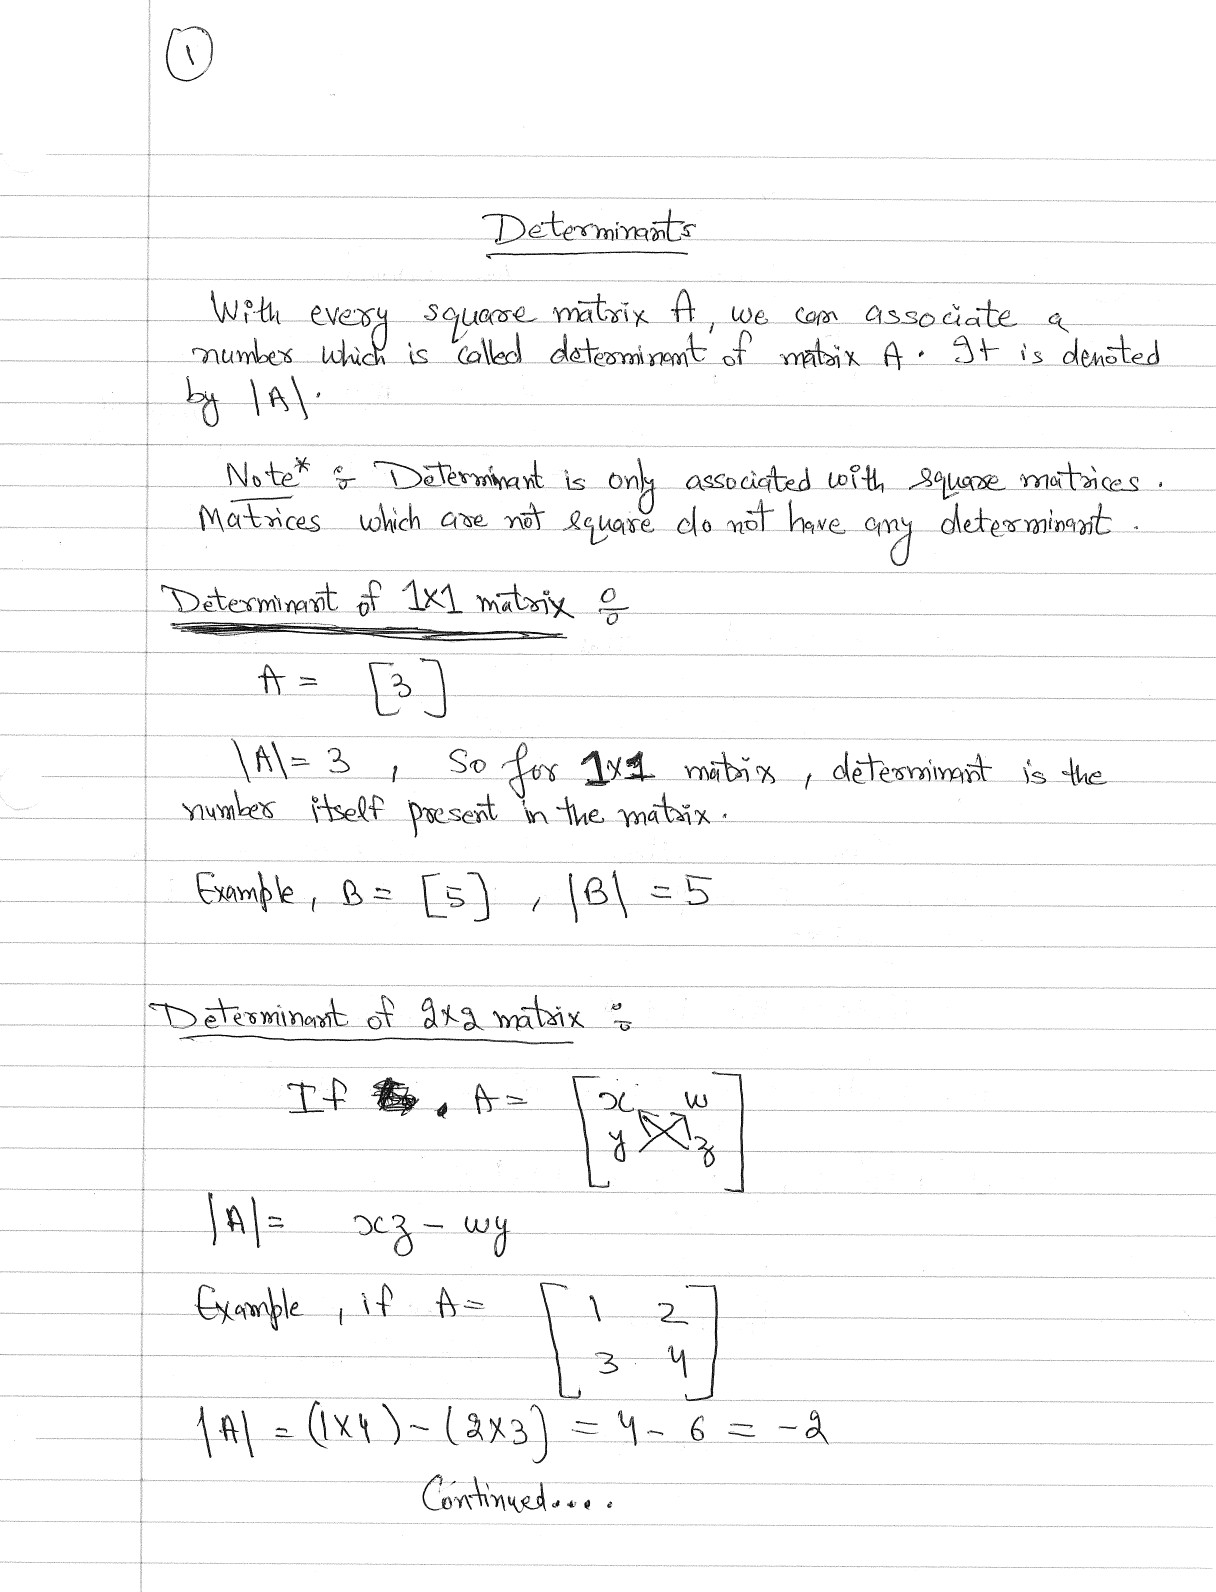 how to calculate determinant of matrix